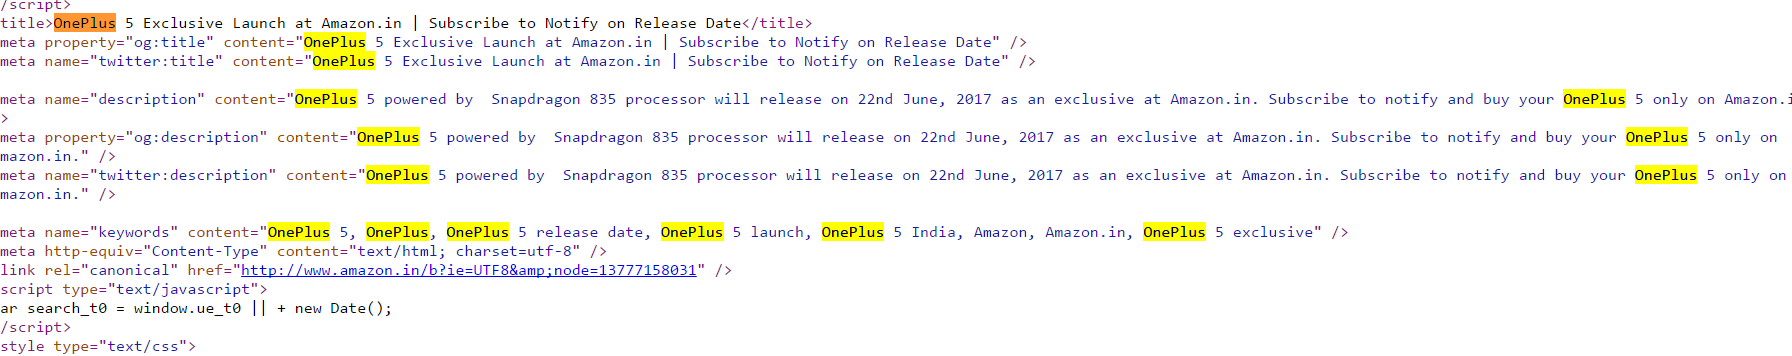 OnePlus 5 to go on sale June 22 as Amazon India exclusive 2